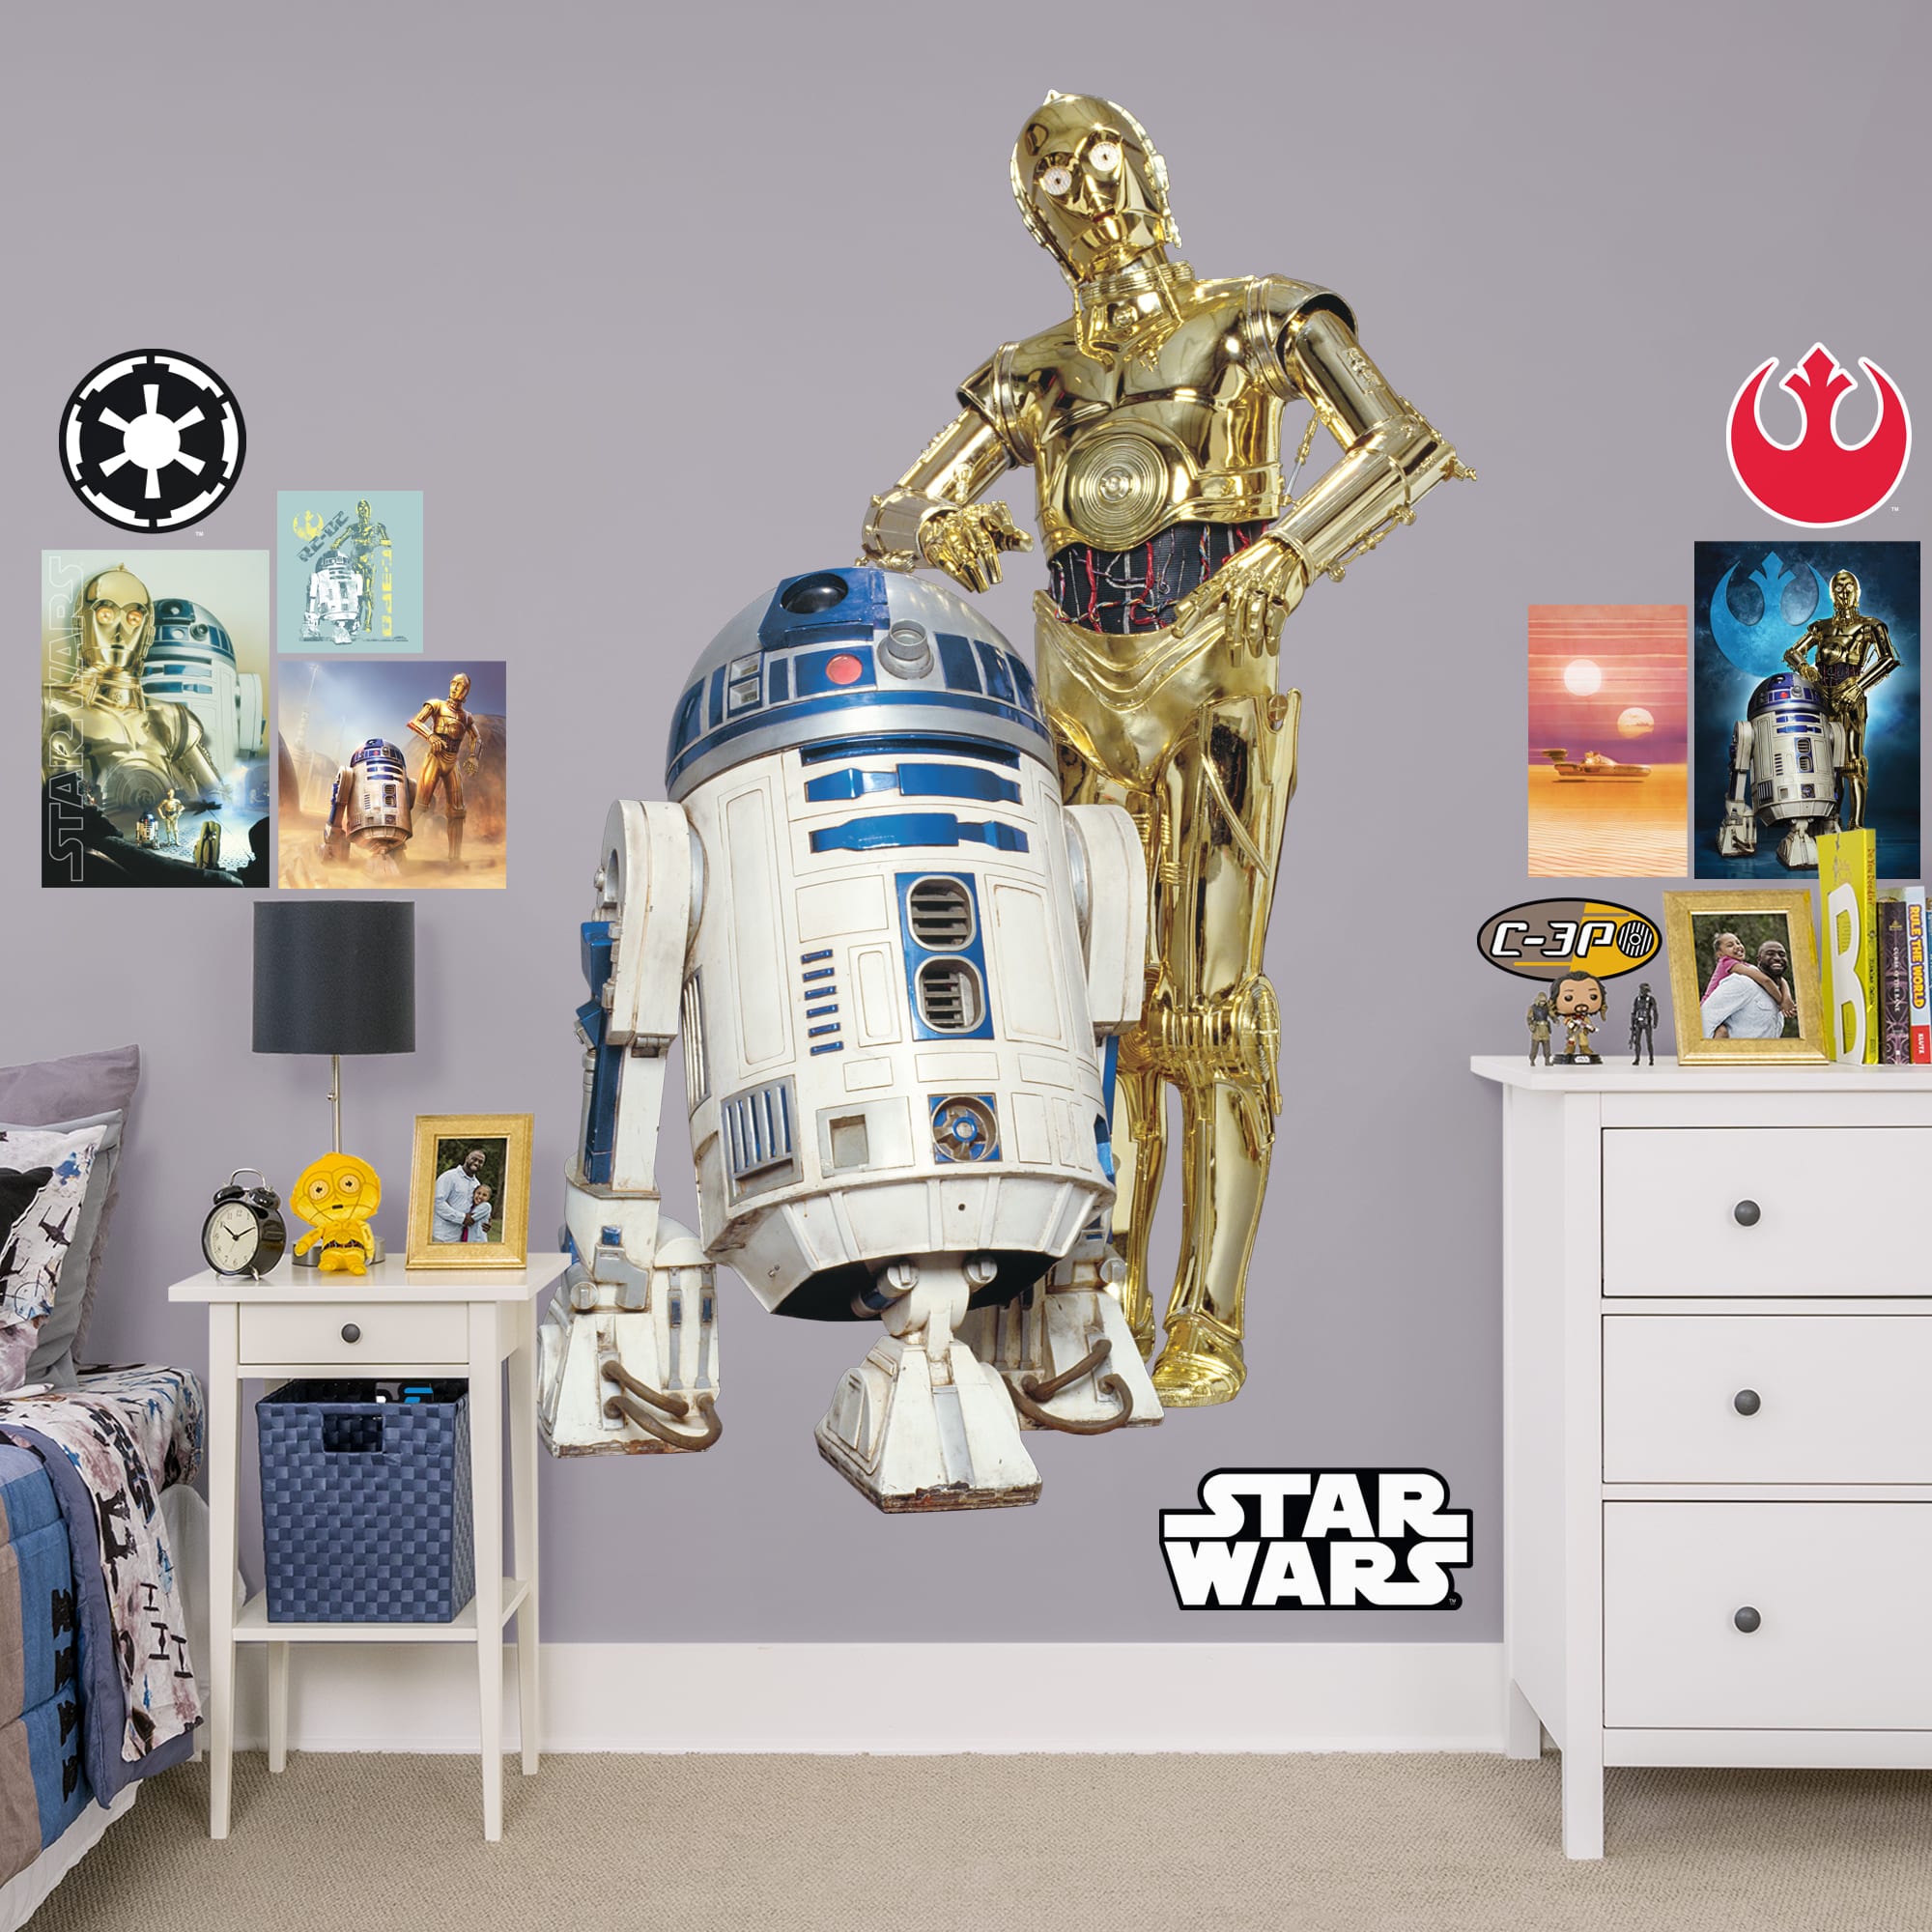 C-3PO & R2-D2 - Officially Licensed Removable Wall Decal Life-Size Character + 10 Decals (50"W x 75"H) by Fathead | Vinyl